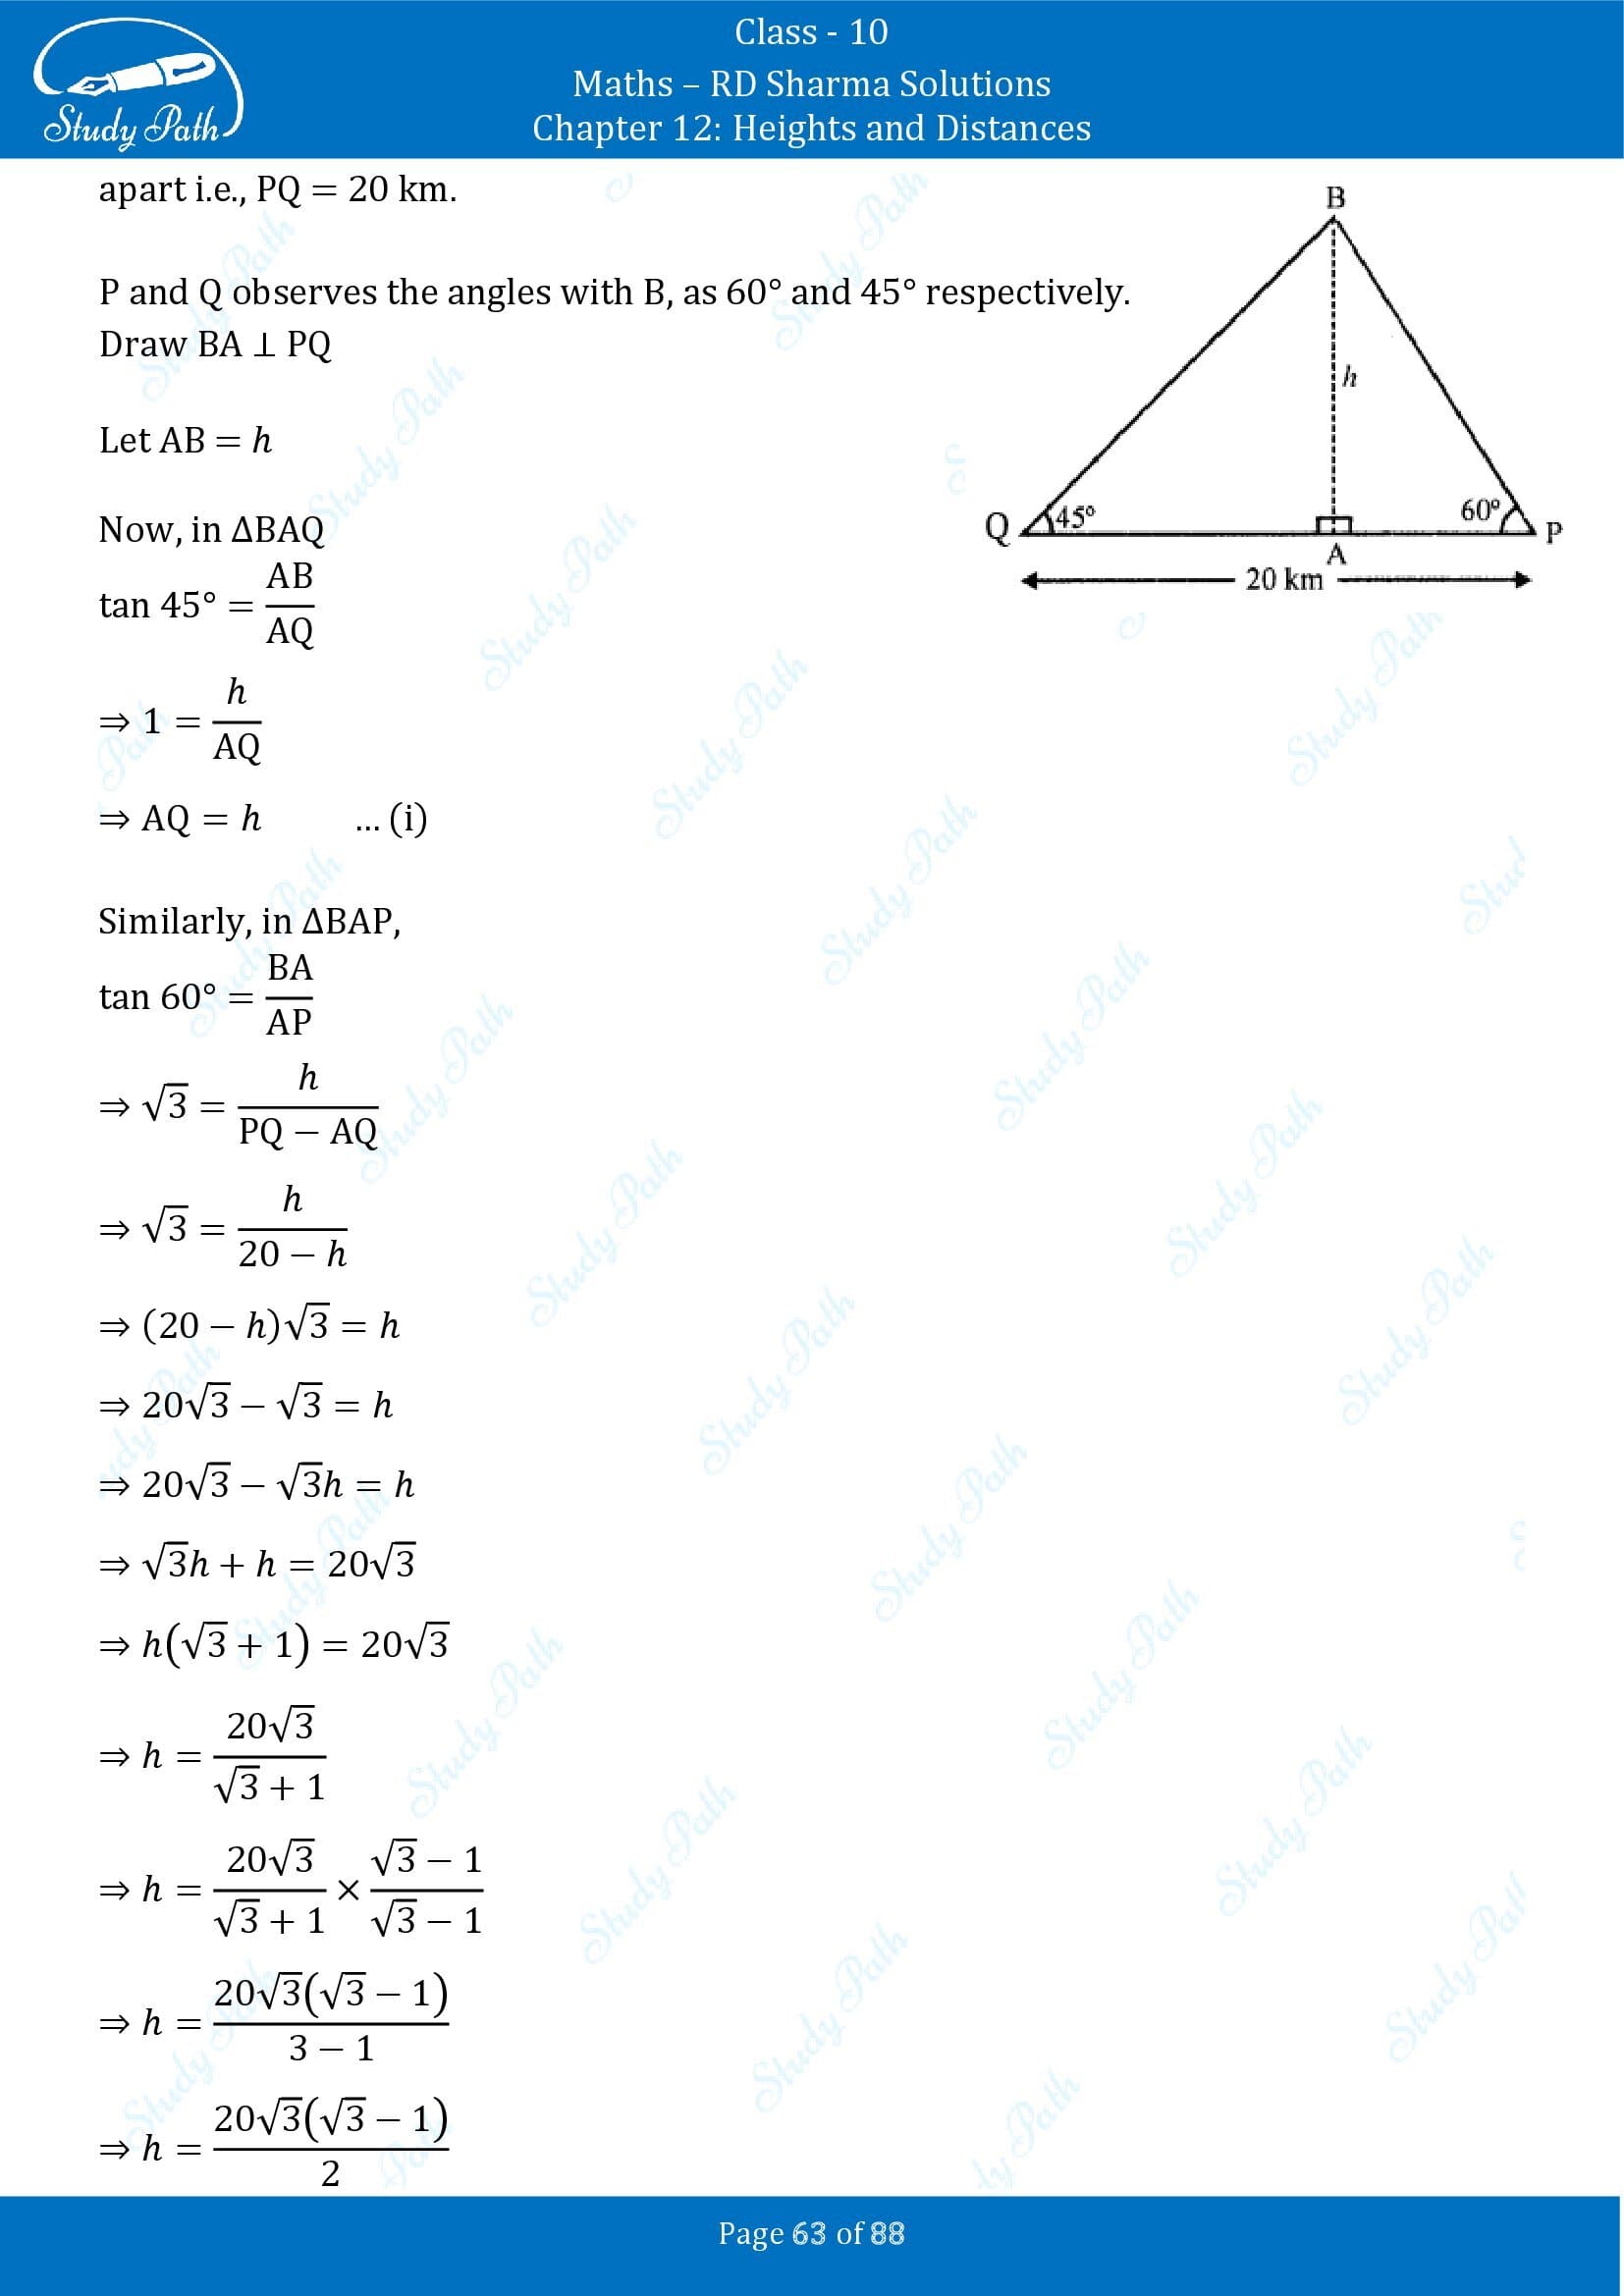 RD Sharma Solutions Class 10 Chapter 12 Heights and Distances Exercise 12.1 00063